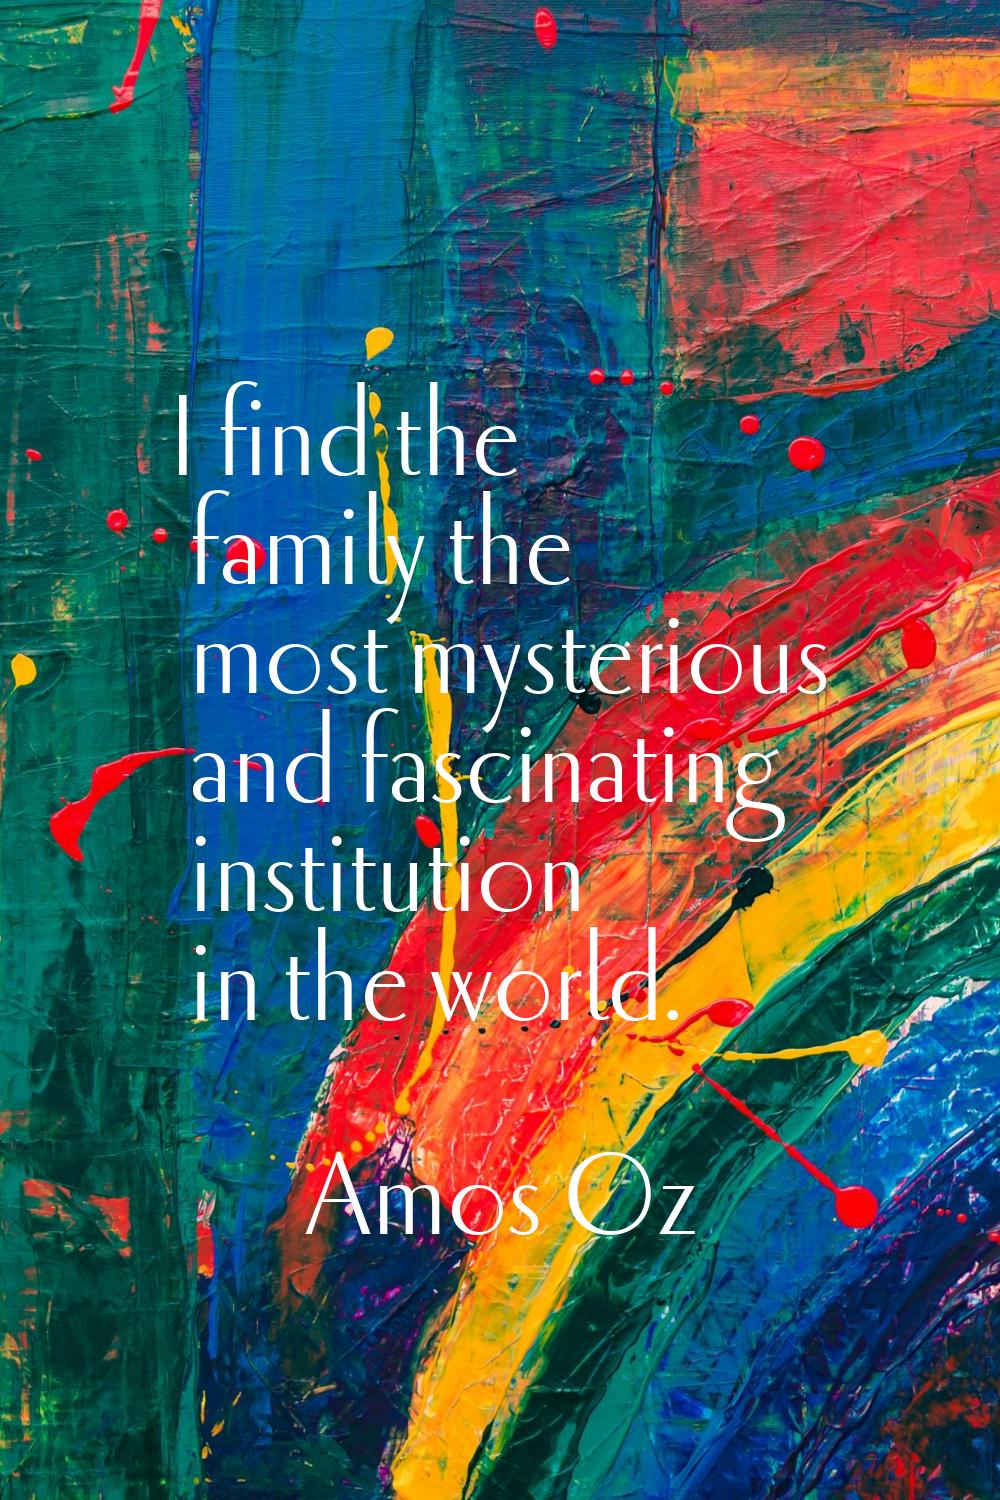 I find the family the most mysterious and fascinating institution in the world.